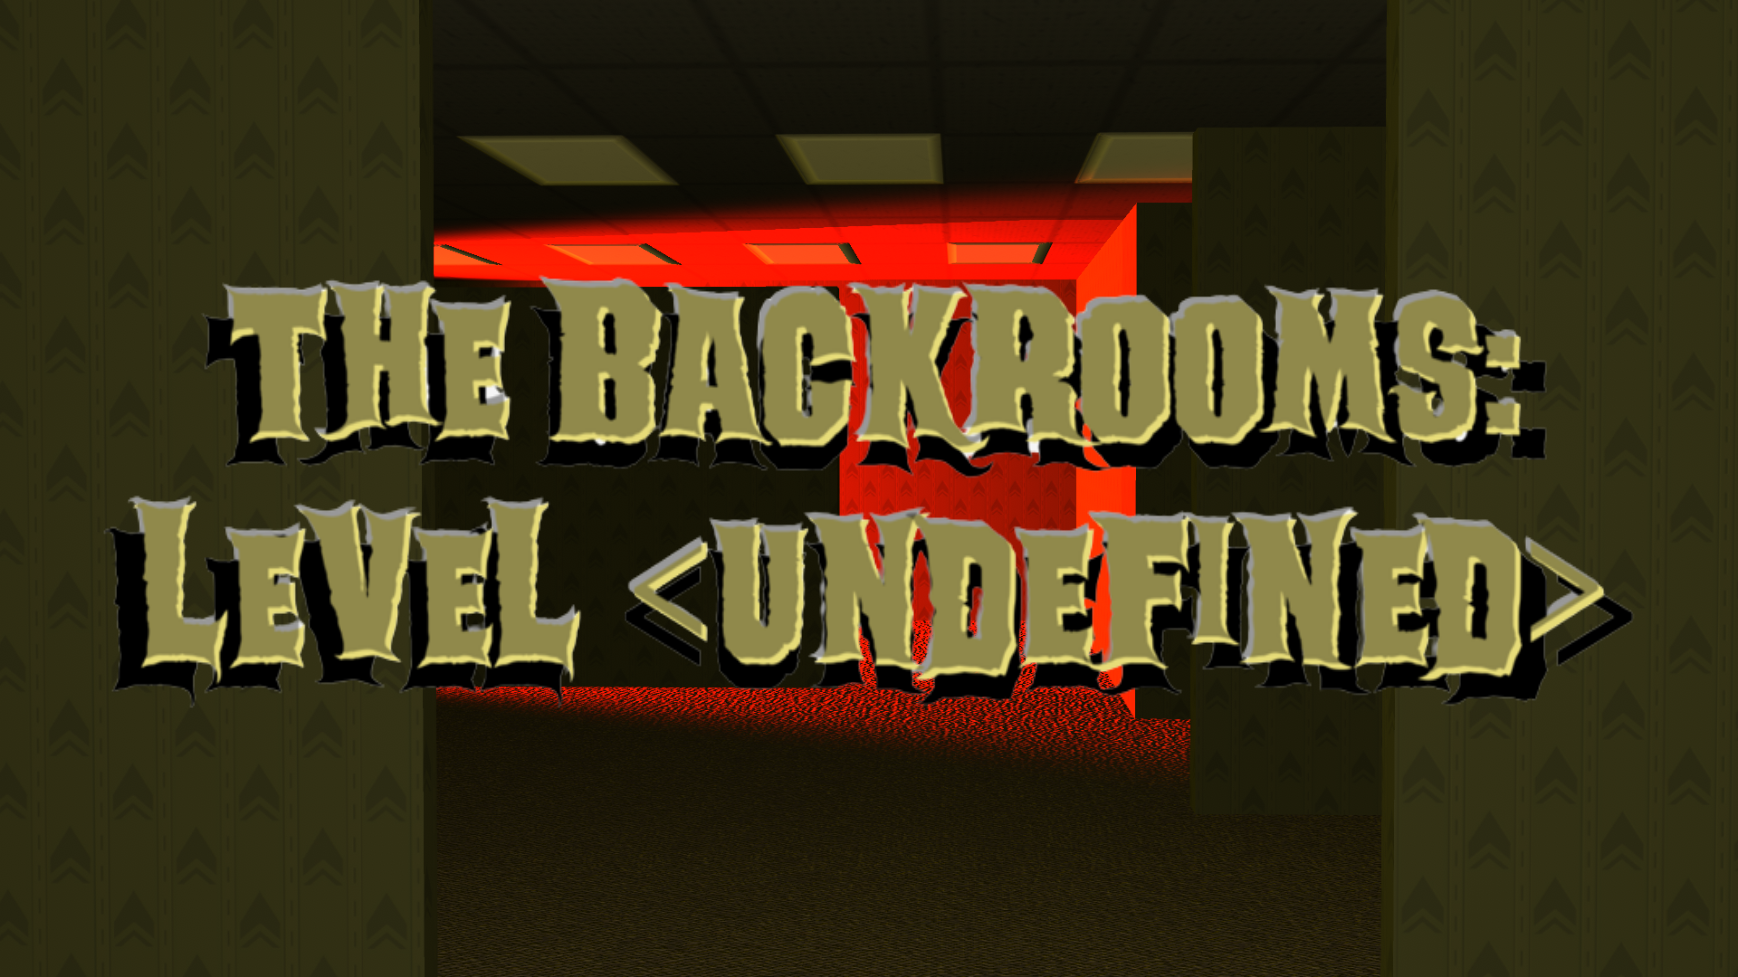 The Backrooms Level <UNDEFINED>